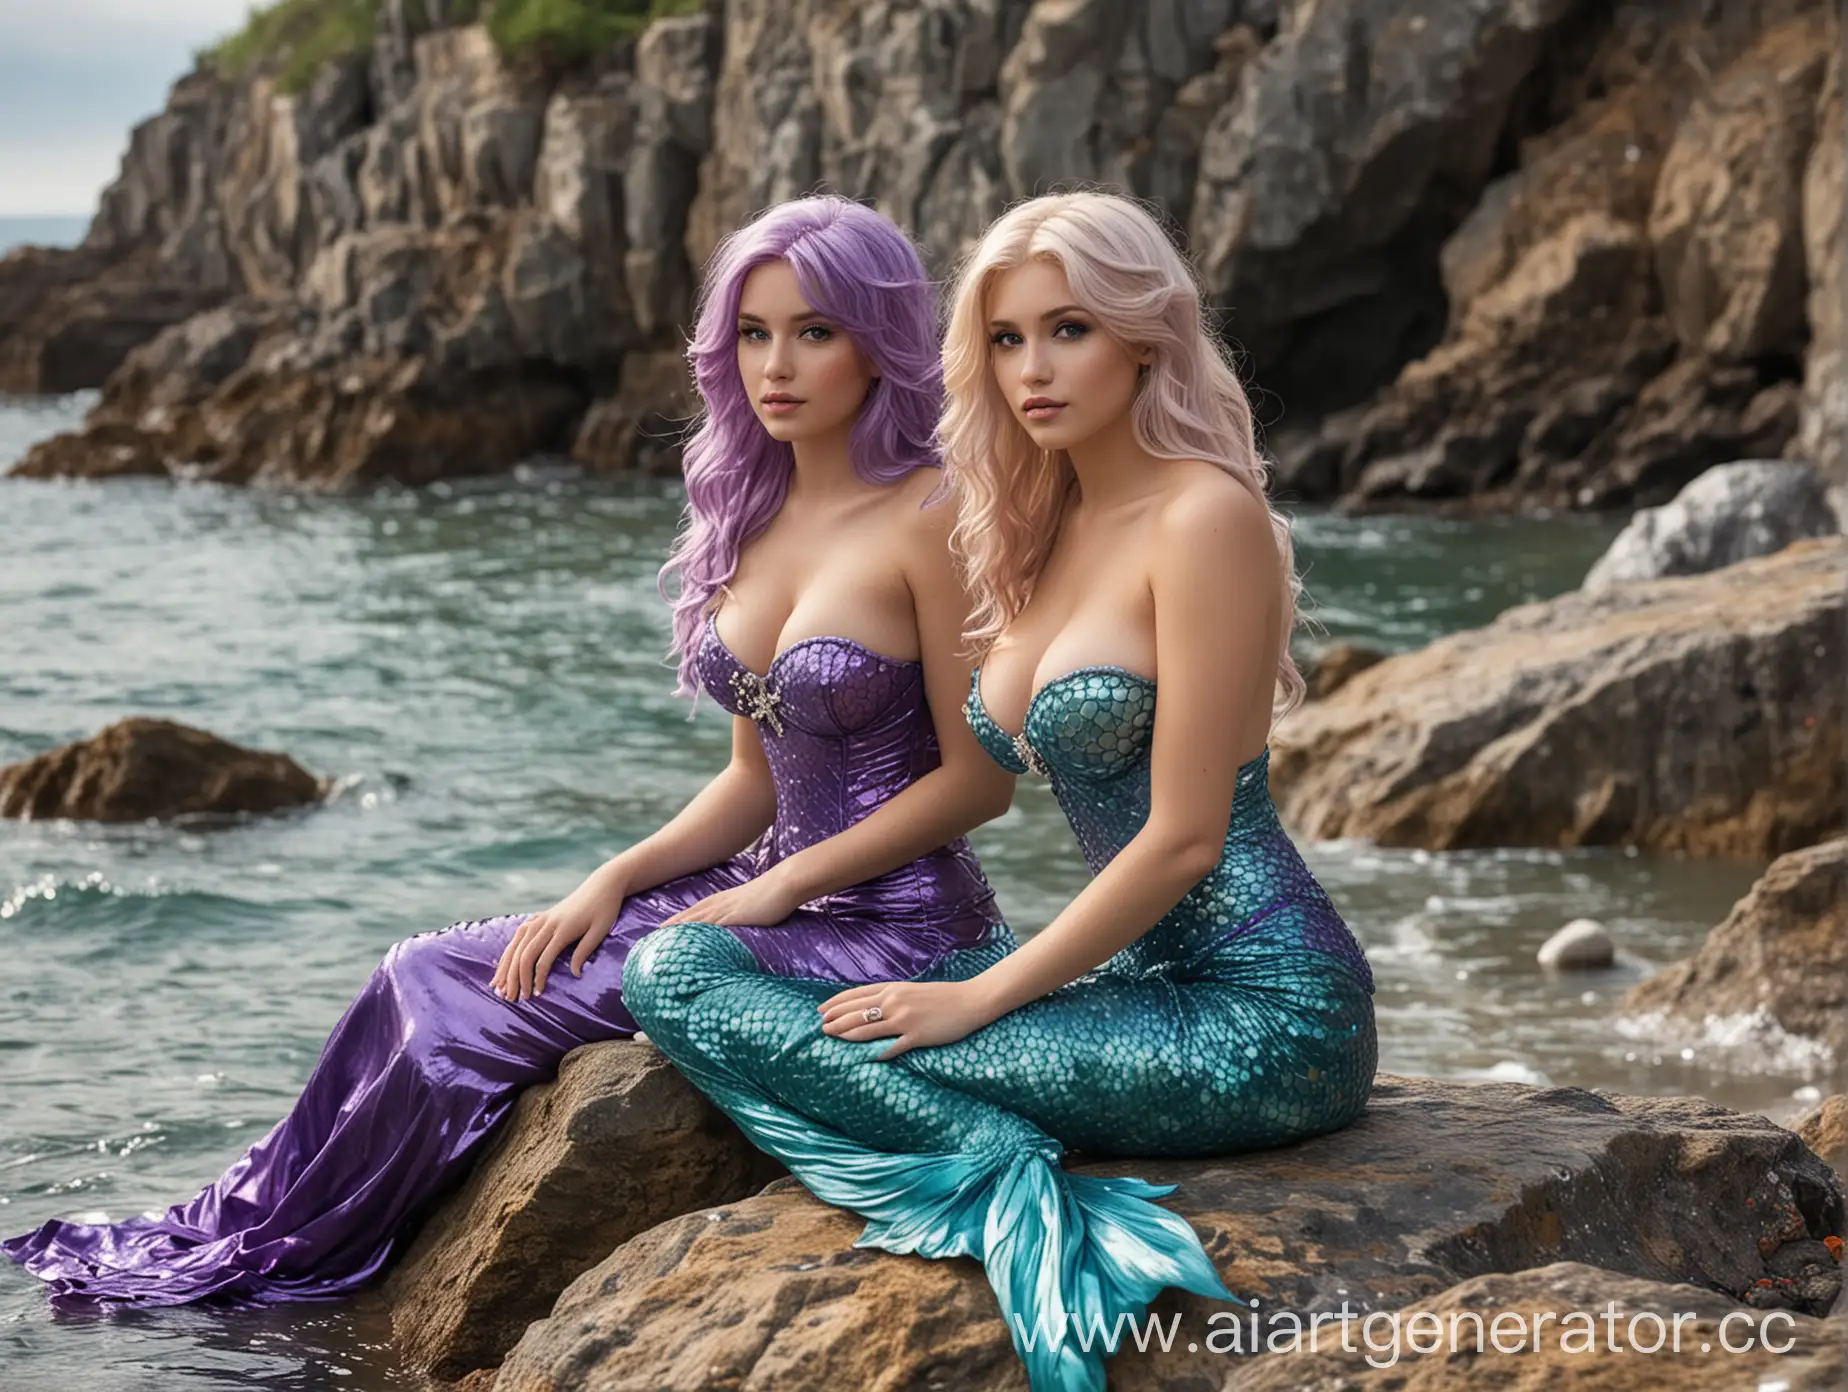 1 busty and beautiful mermaid with short blonde hair, sitting with another beautiful and bustier mermaid that has long purple hair, sitting on a rock near the shoreline.